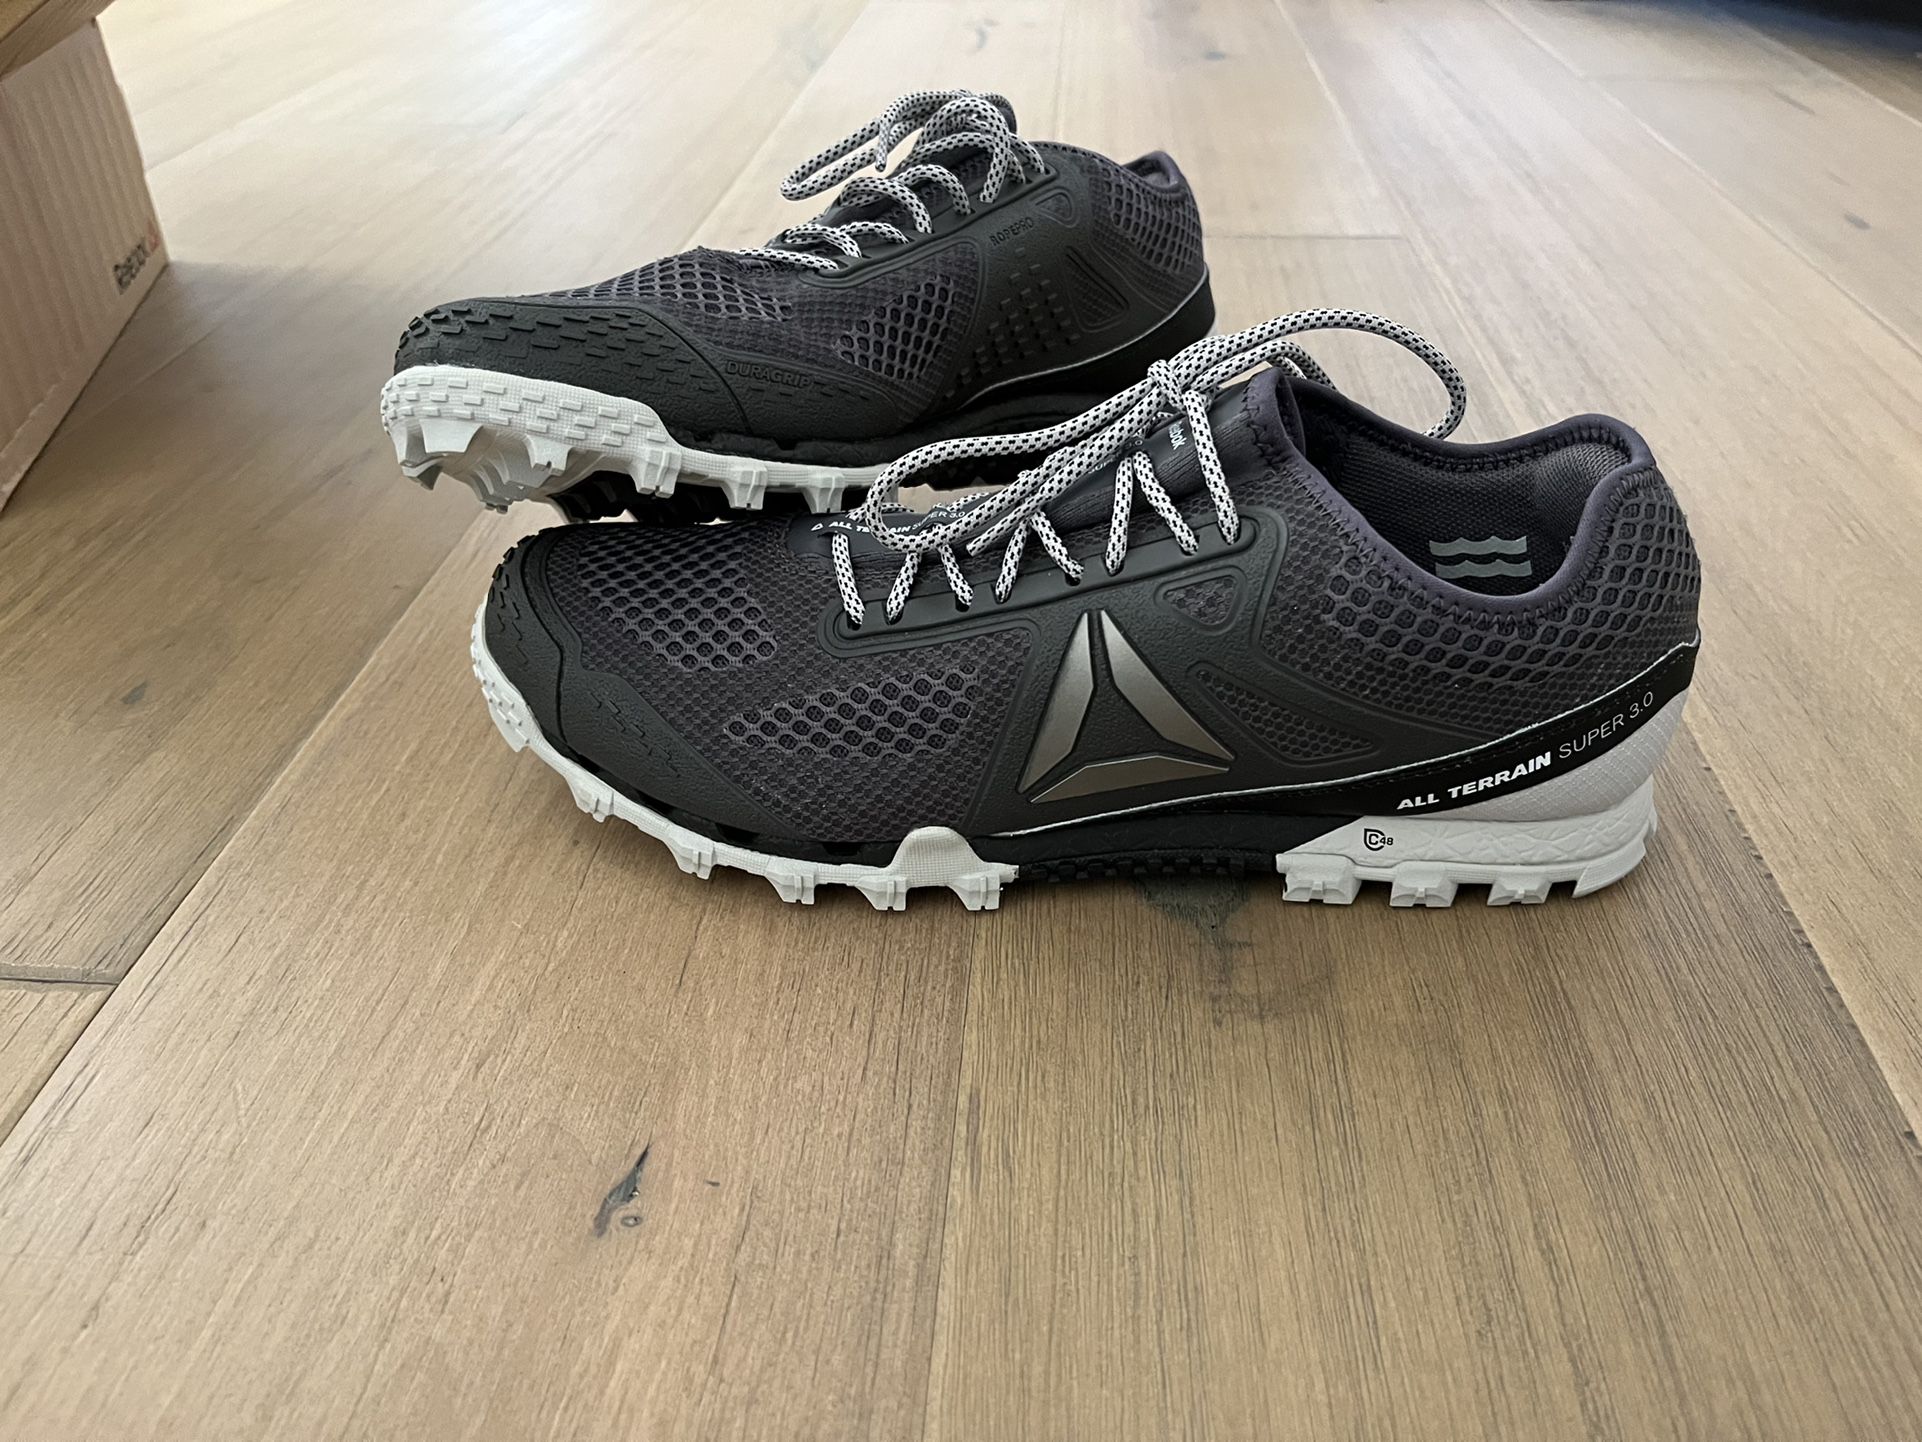 Reebok All Terrain 3.0 Running Shoes for Sale in Fallbrook, CA